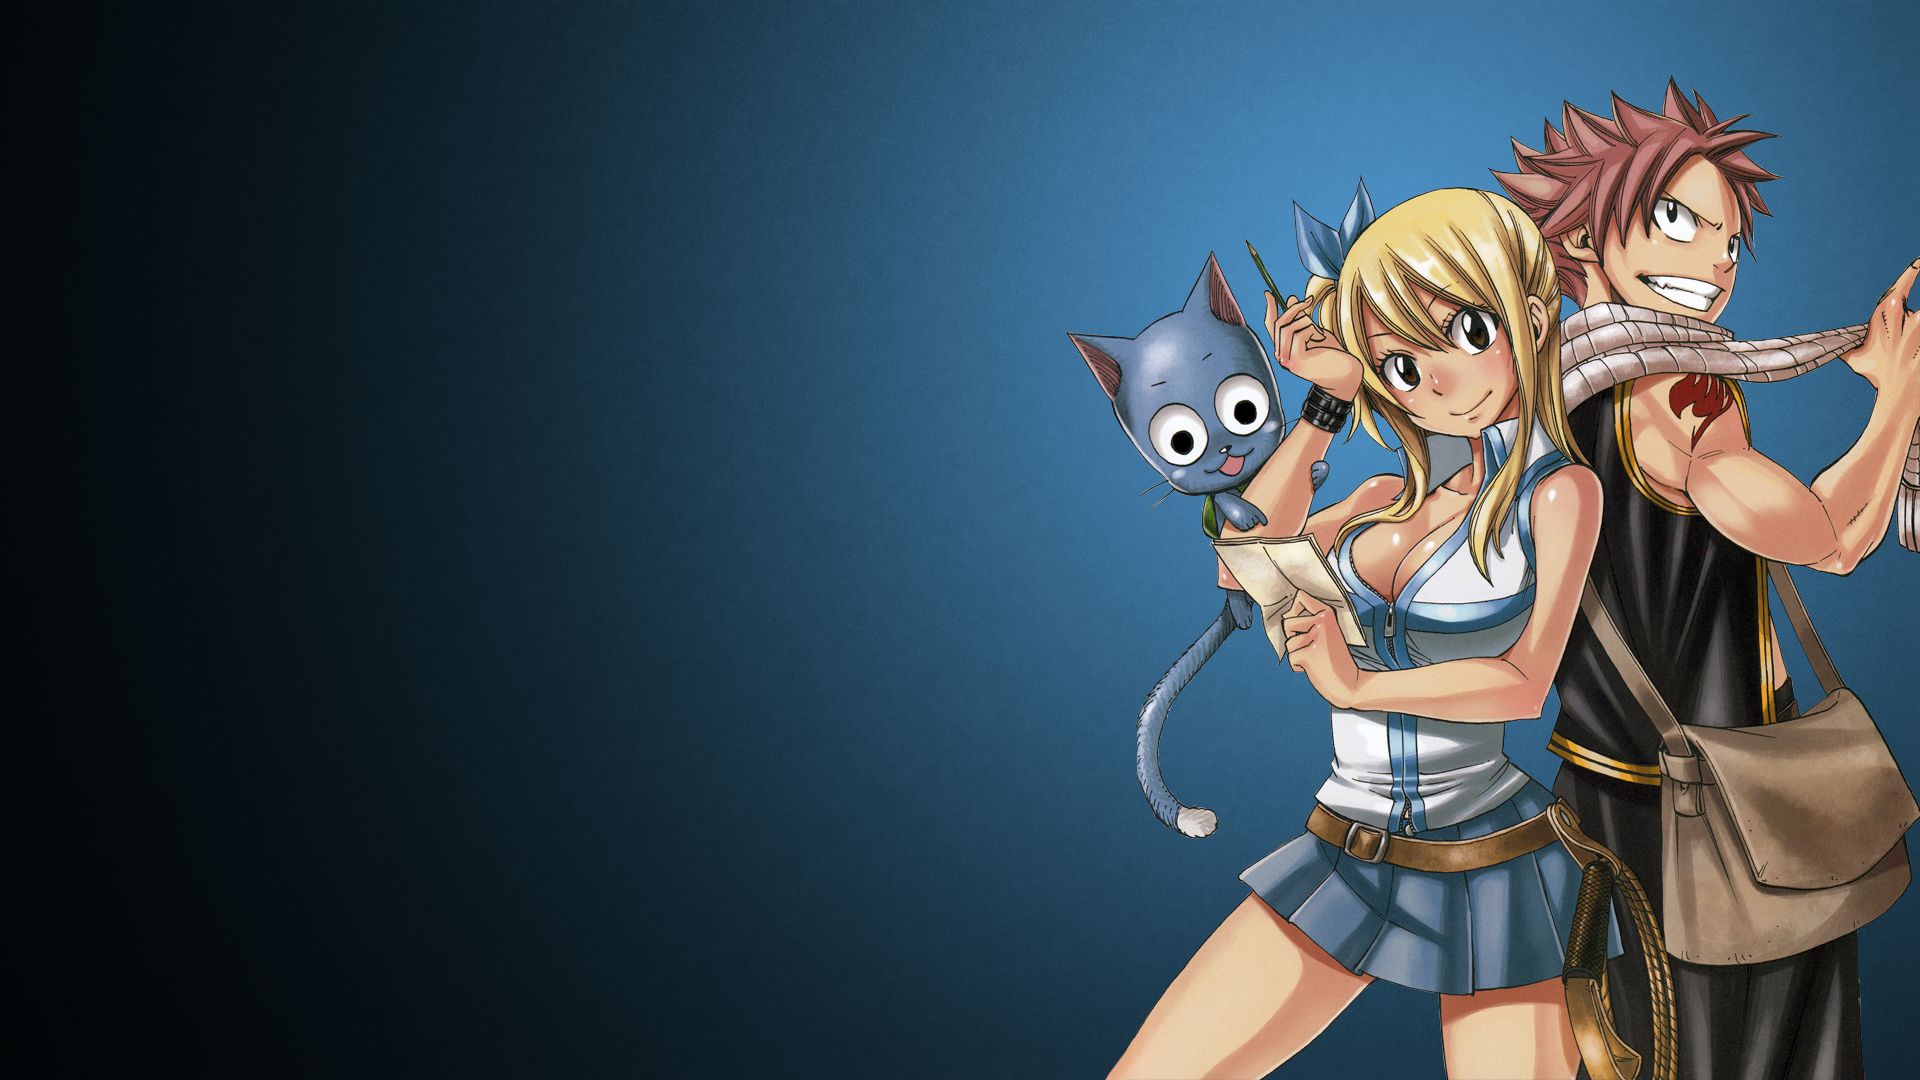 Fairy Tail Anime Wallpaper Full Hd Free Download